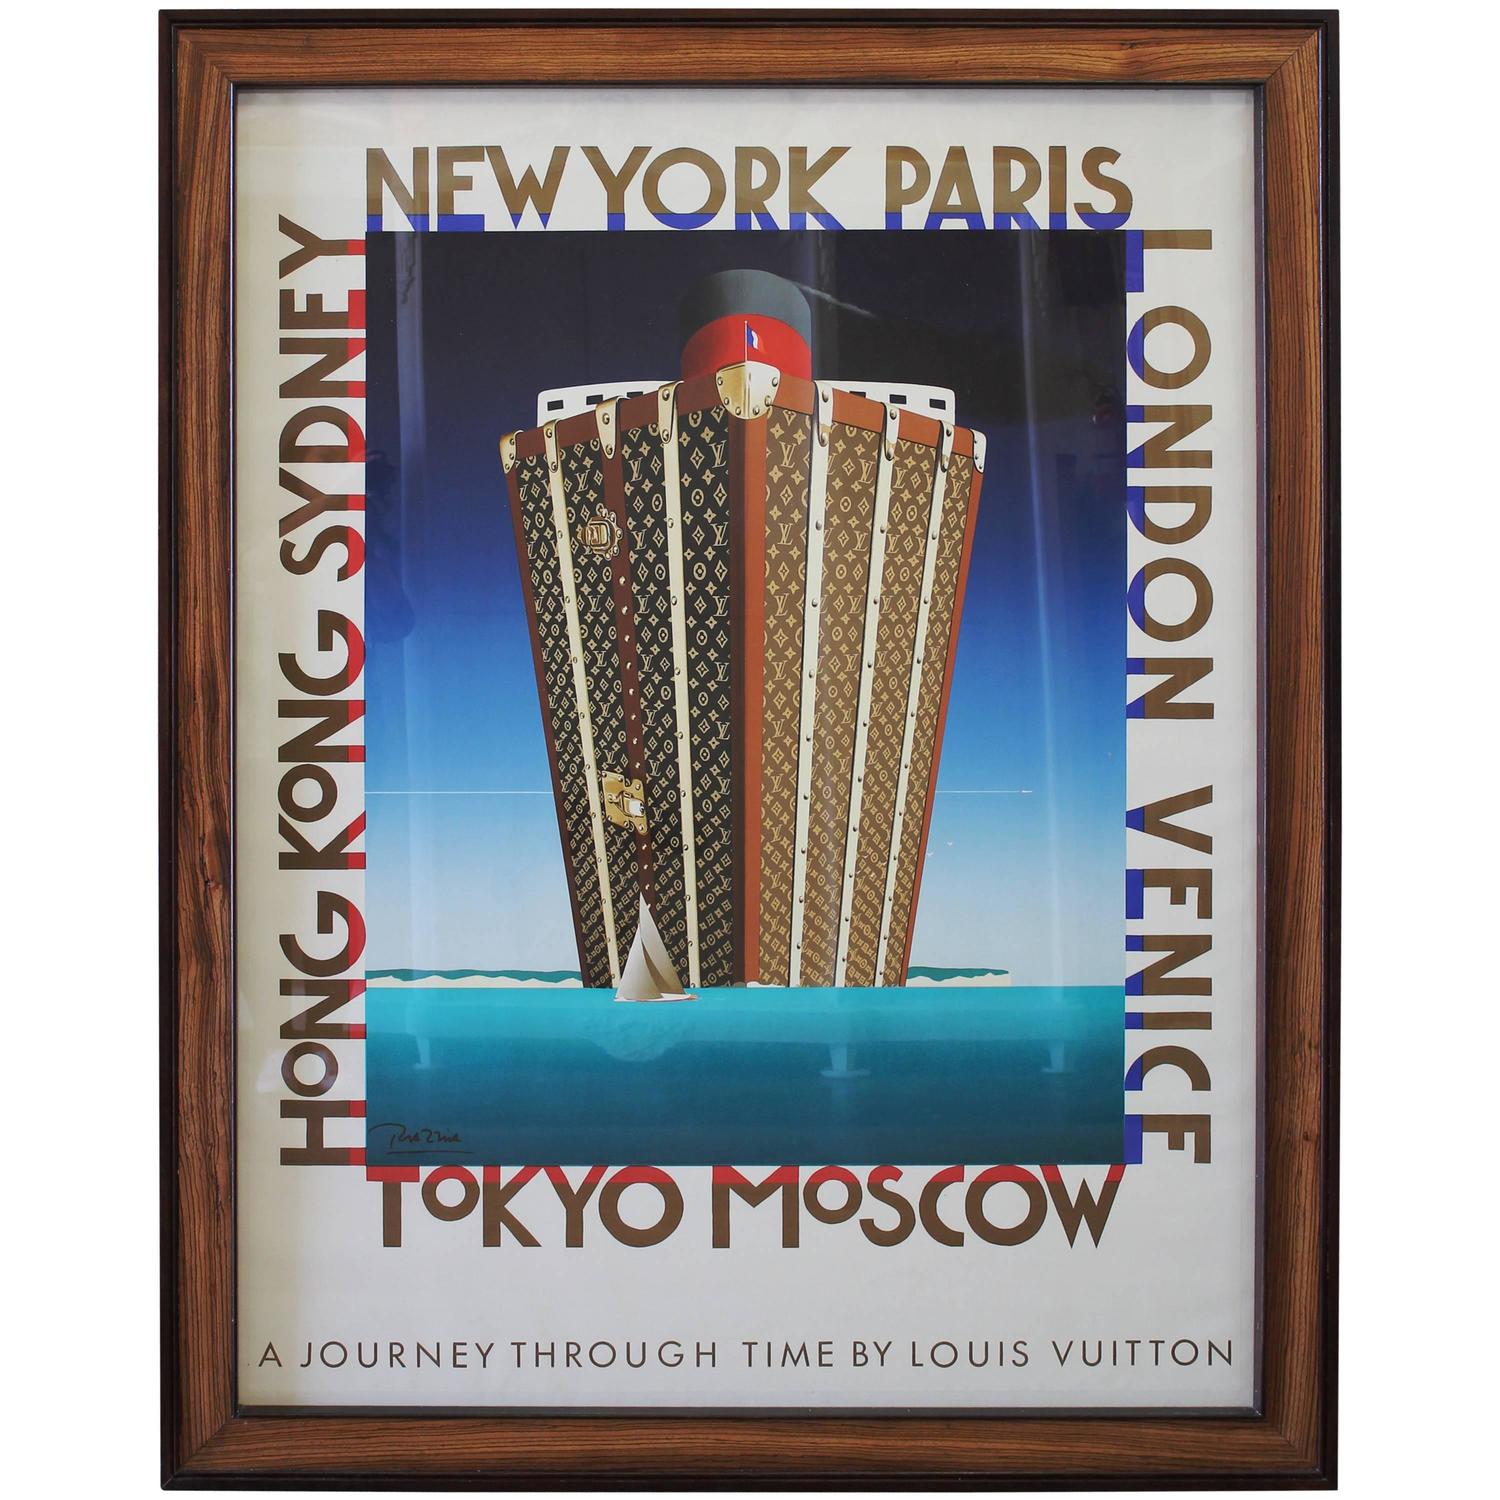 Louis Vuitton the Voyage Linen Poster in Handmade Zebra Wood Mahogany Frame For Sale at 1stdibs